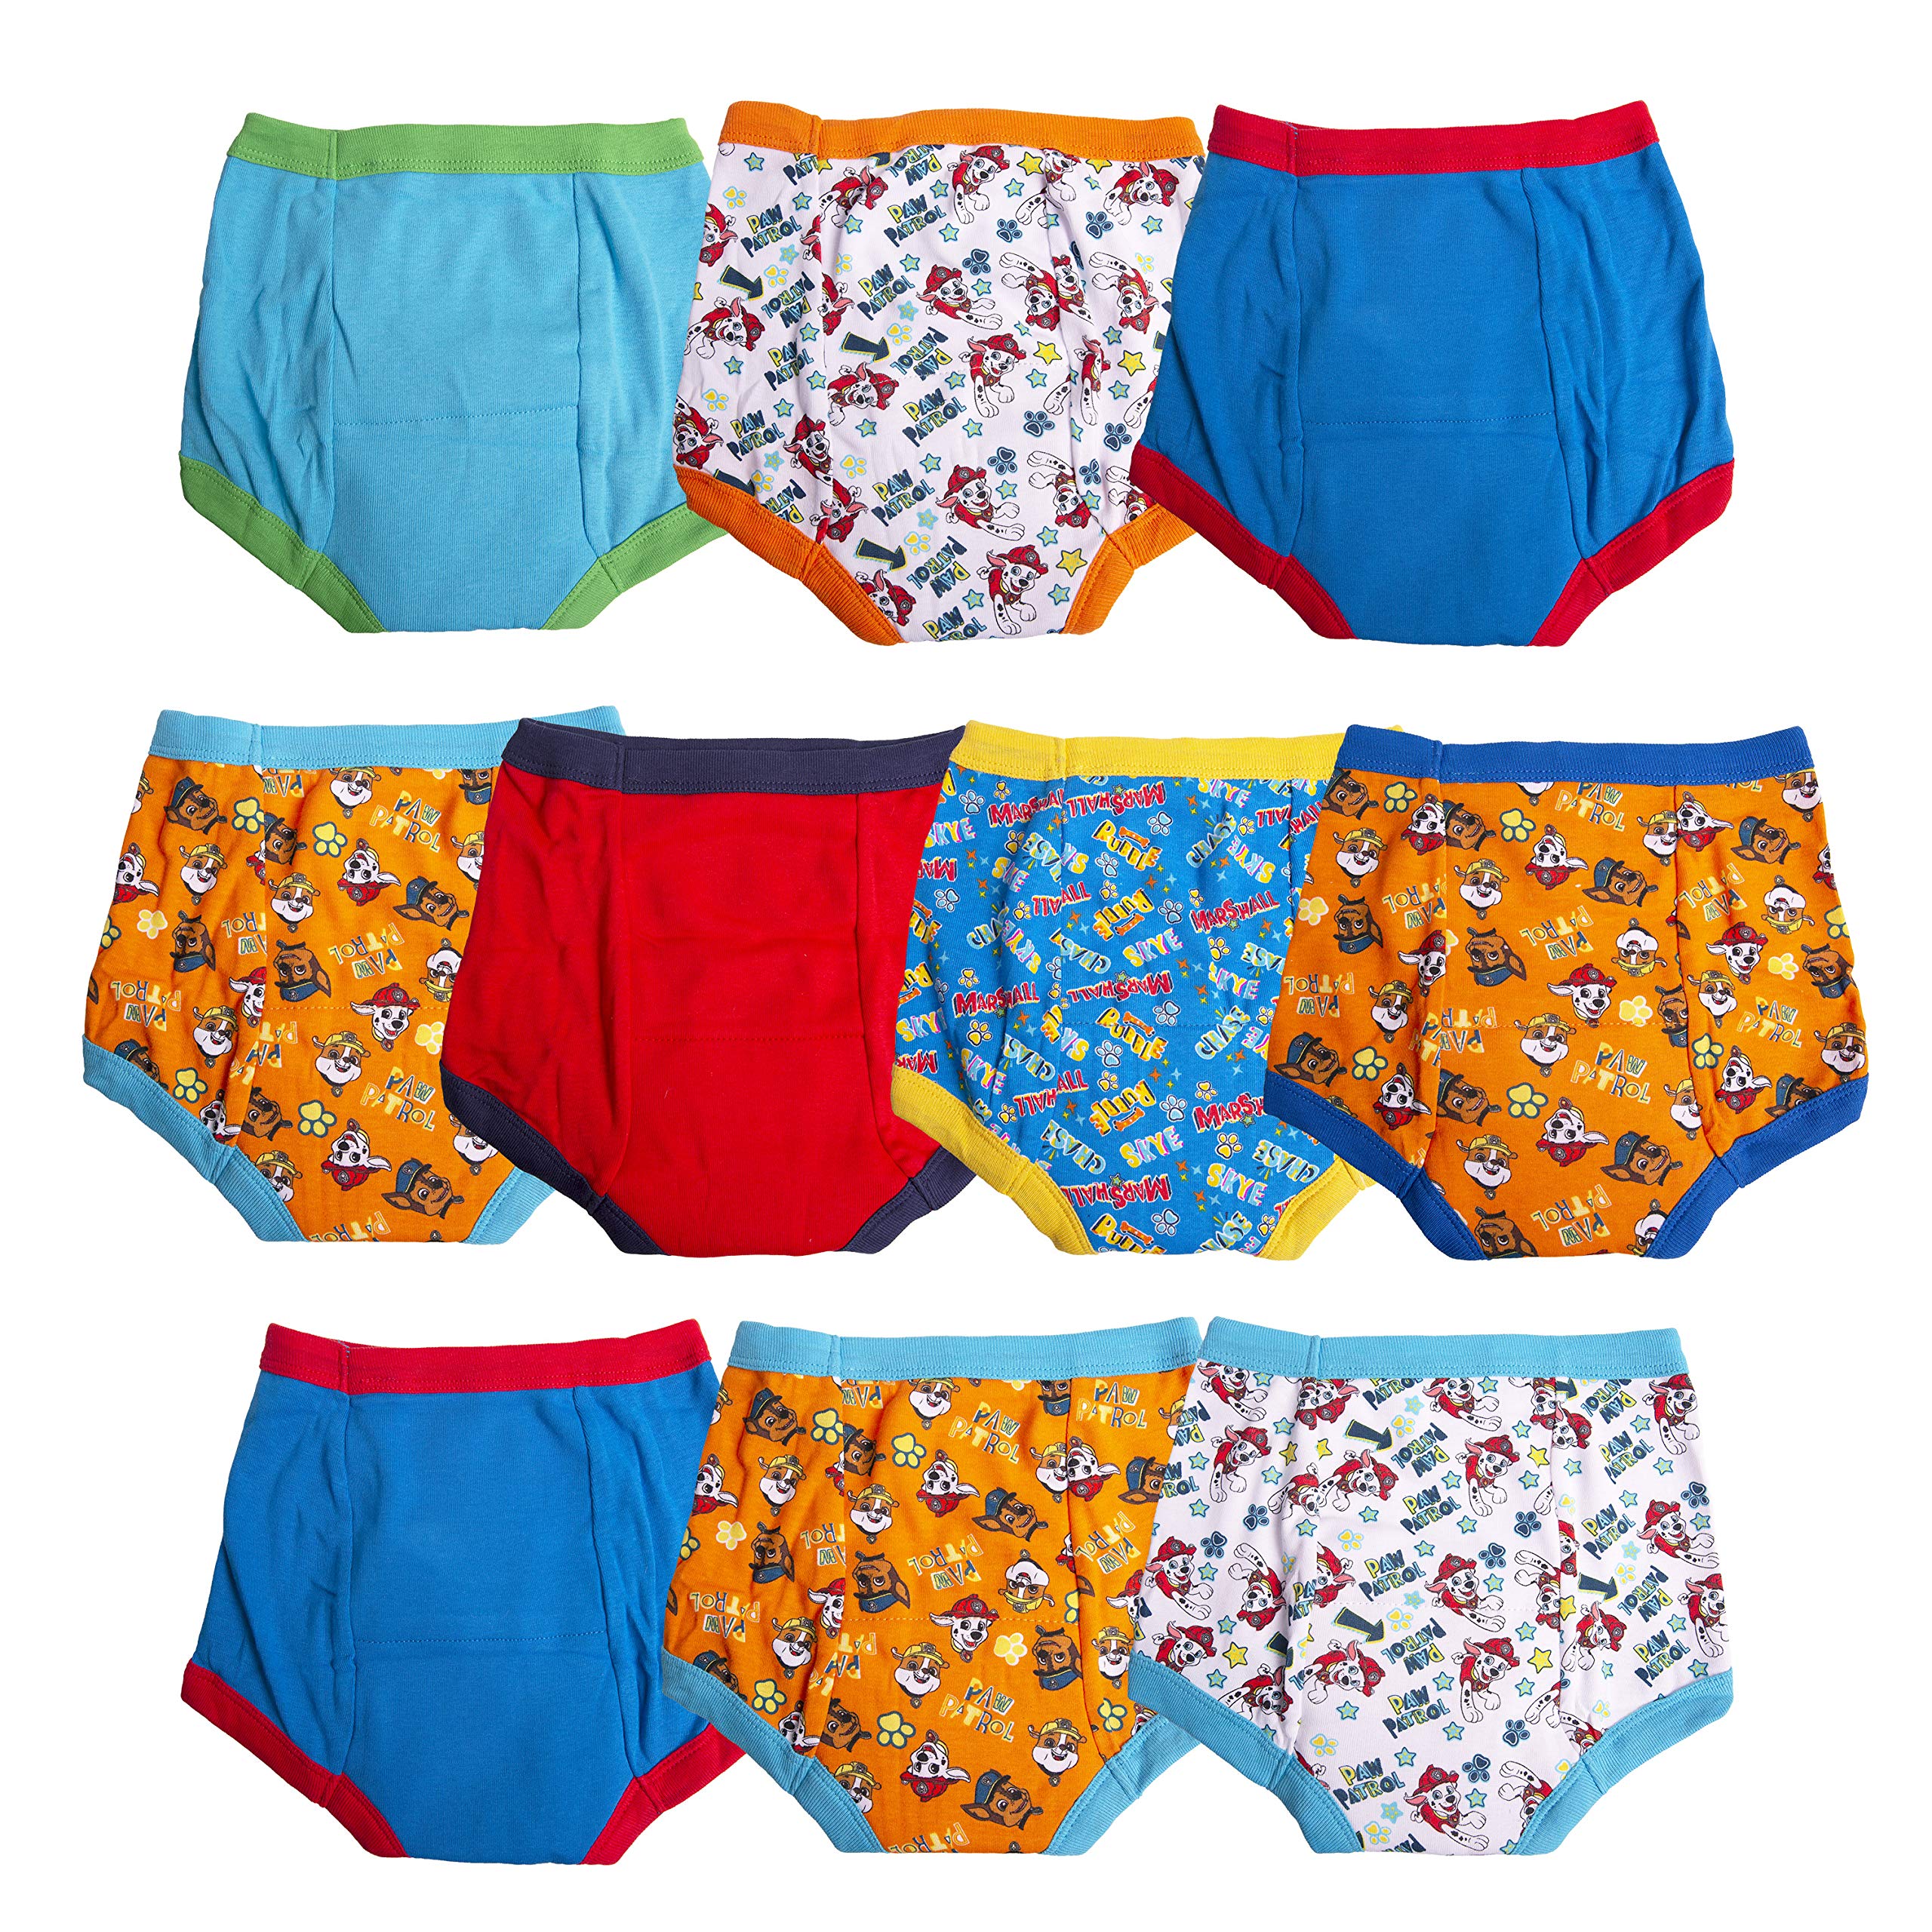 Nickelodeon Boys Toddler Potty Training Pants with Chase, Skye & More with  Success Chart & Stickers Size 18, 2t, 3t, 4t, Pawbtraining10pk, 4 Years  price in UAE,  UAE